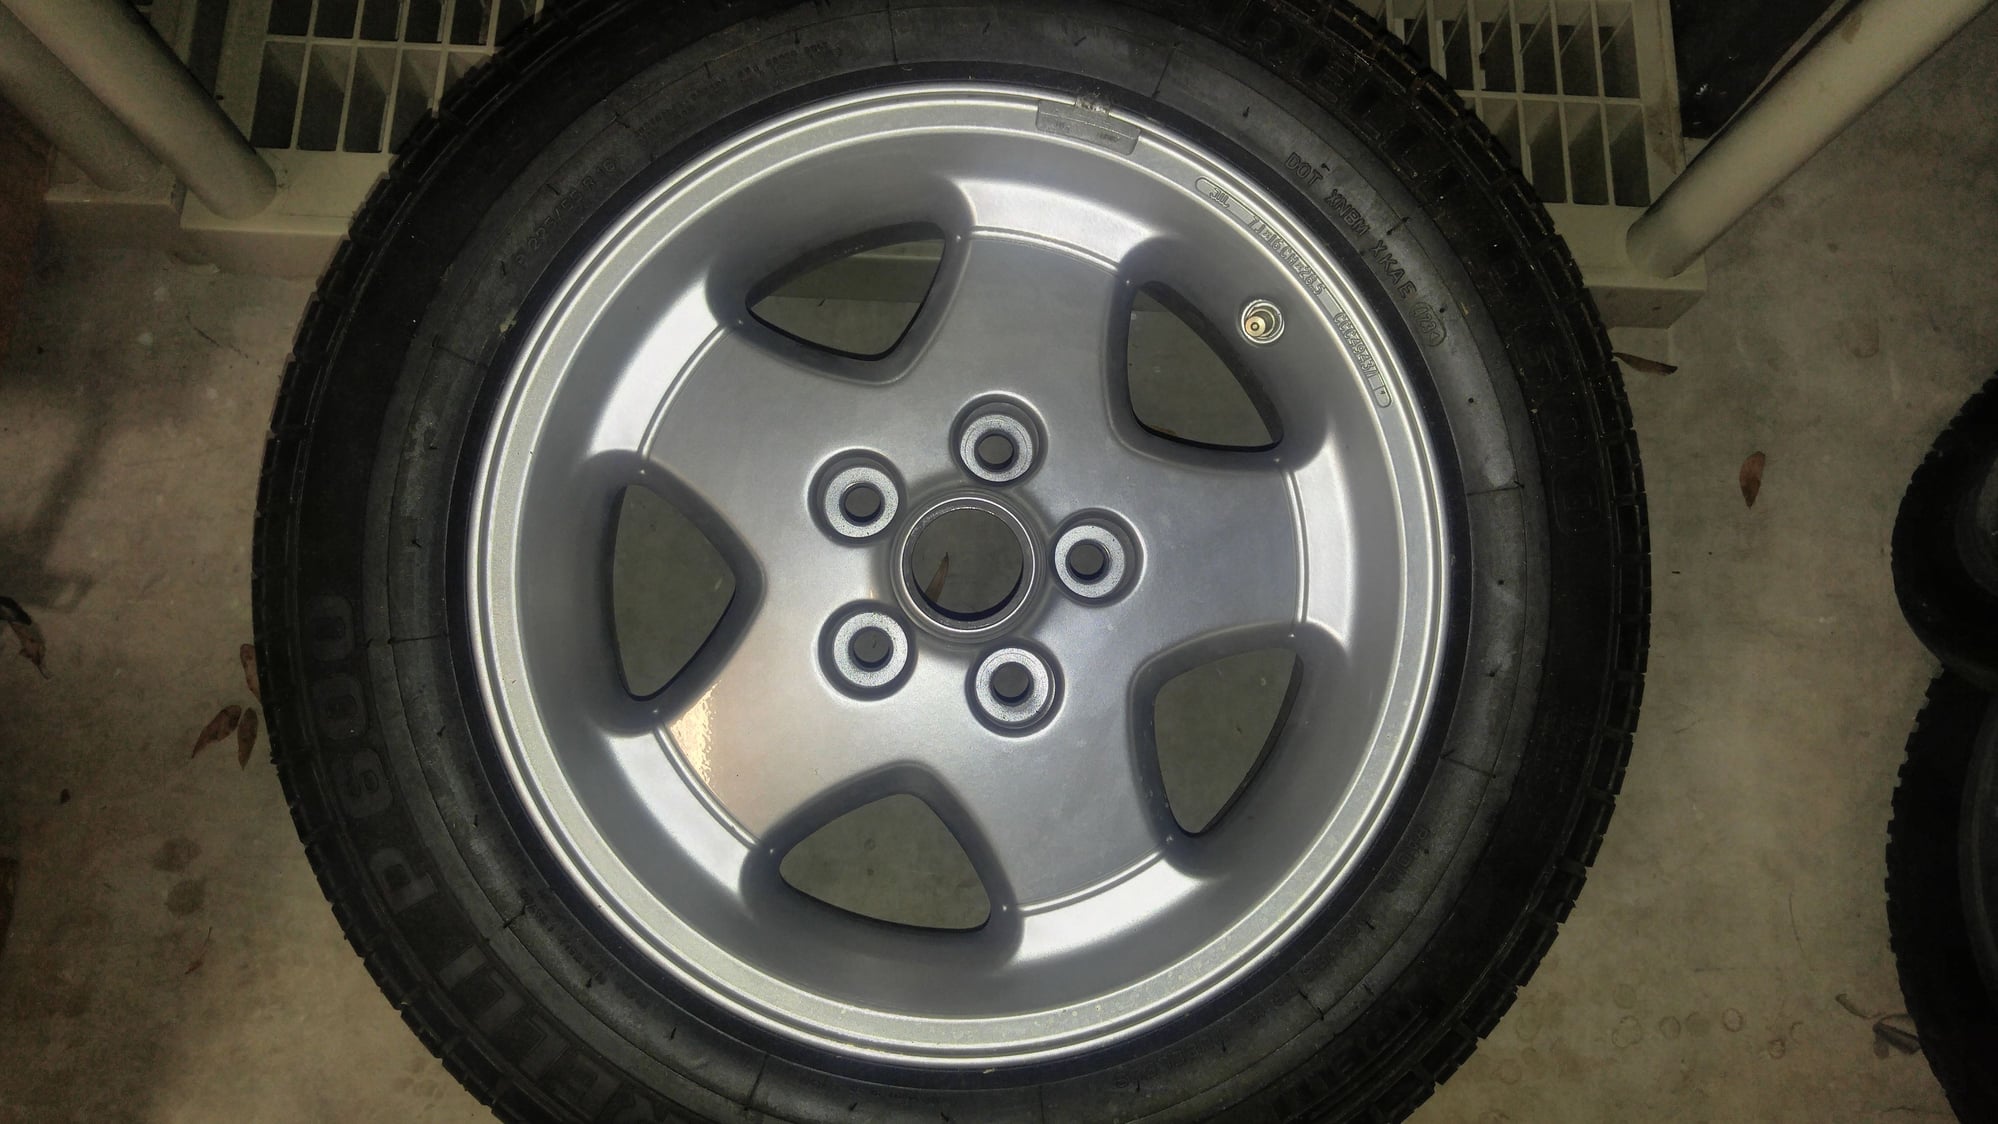 Wheels and Tires/Axles - Wanted:  '94-'95 XJS wheels (or wheels & tires) - Used - 1994 to 1995 Jaguar XJS - Palm City, FL 34990, United States